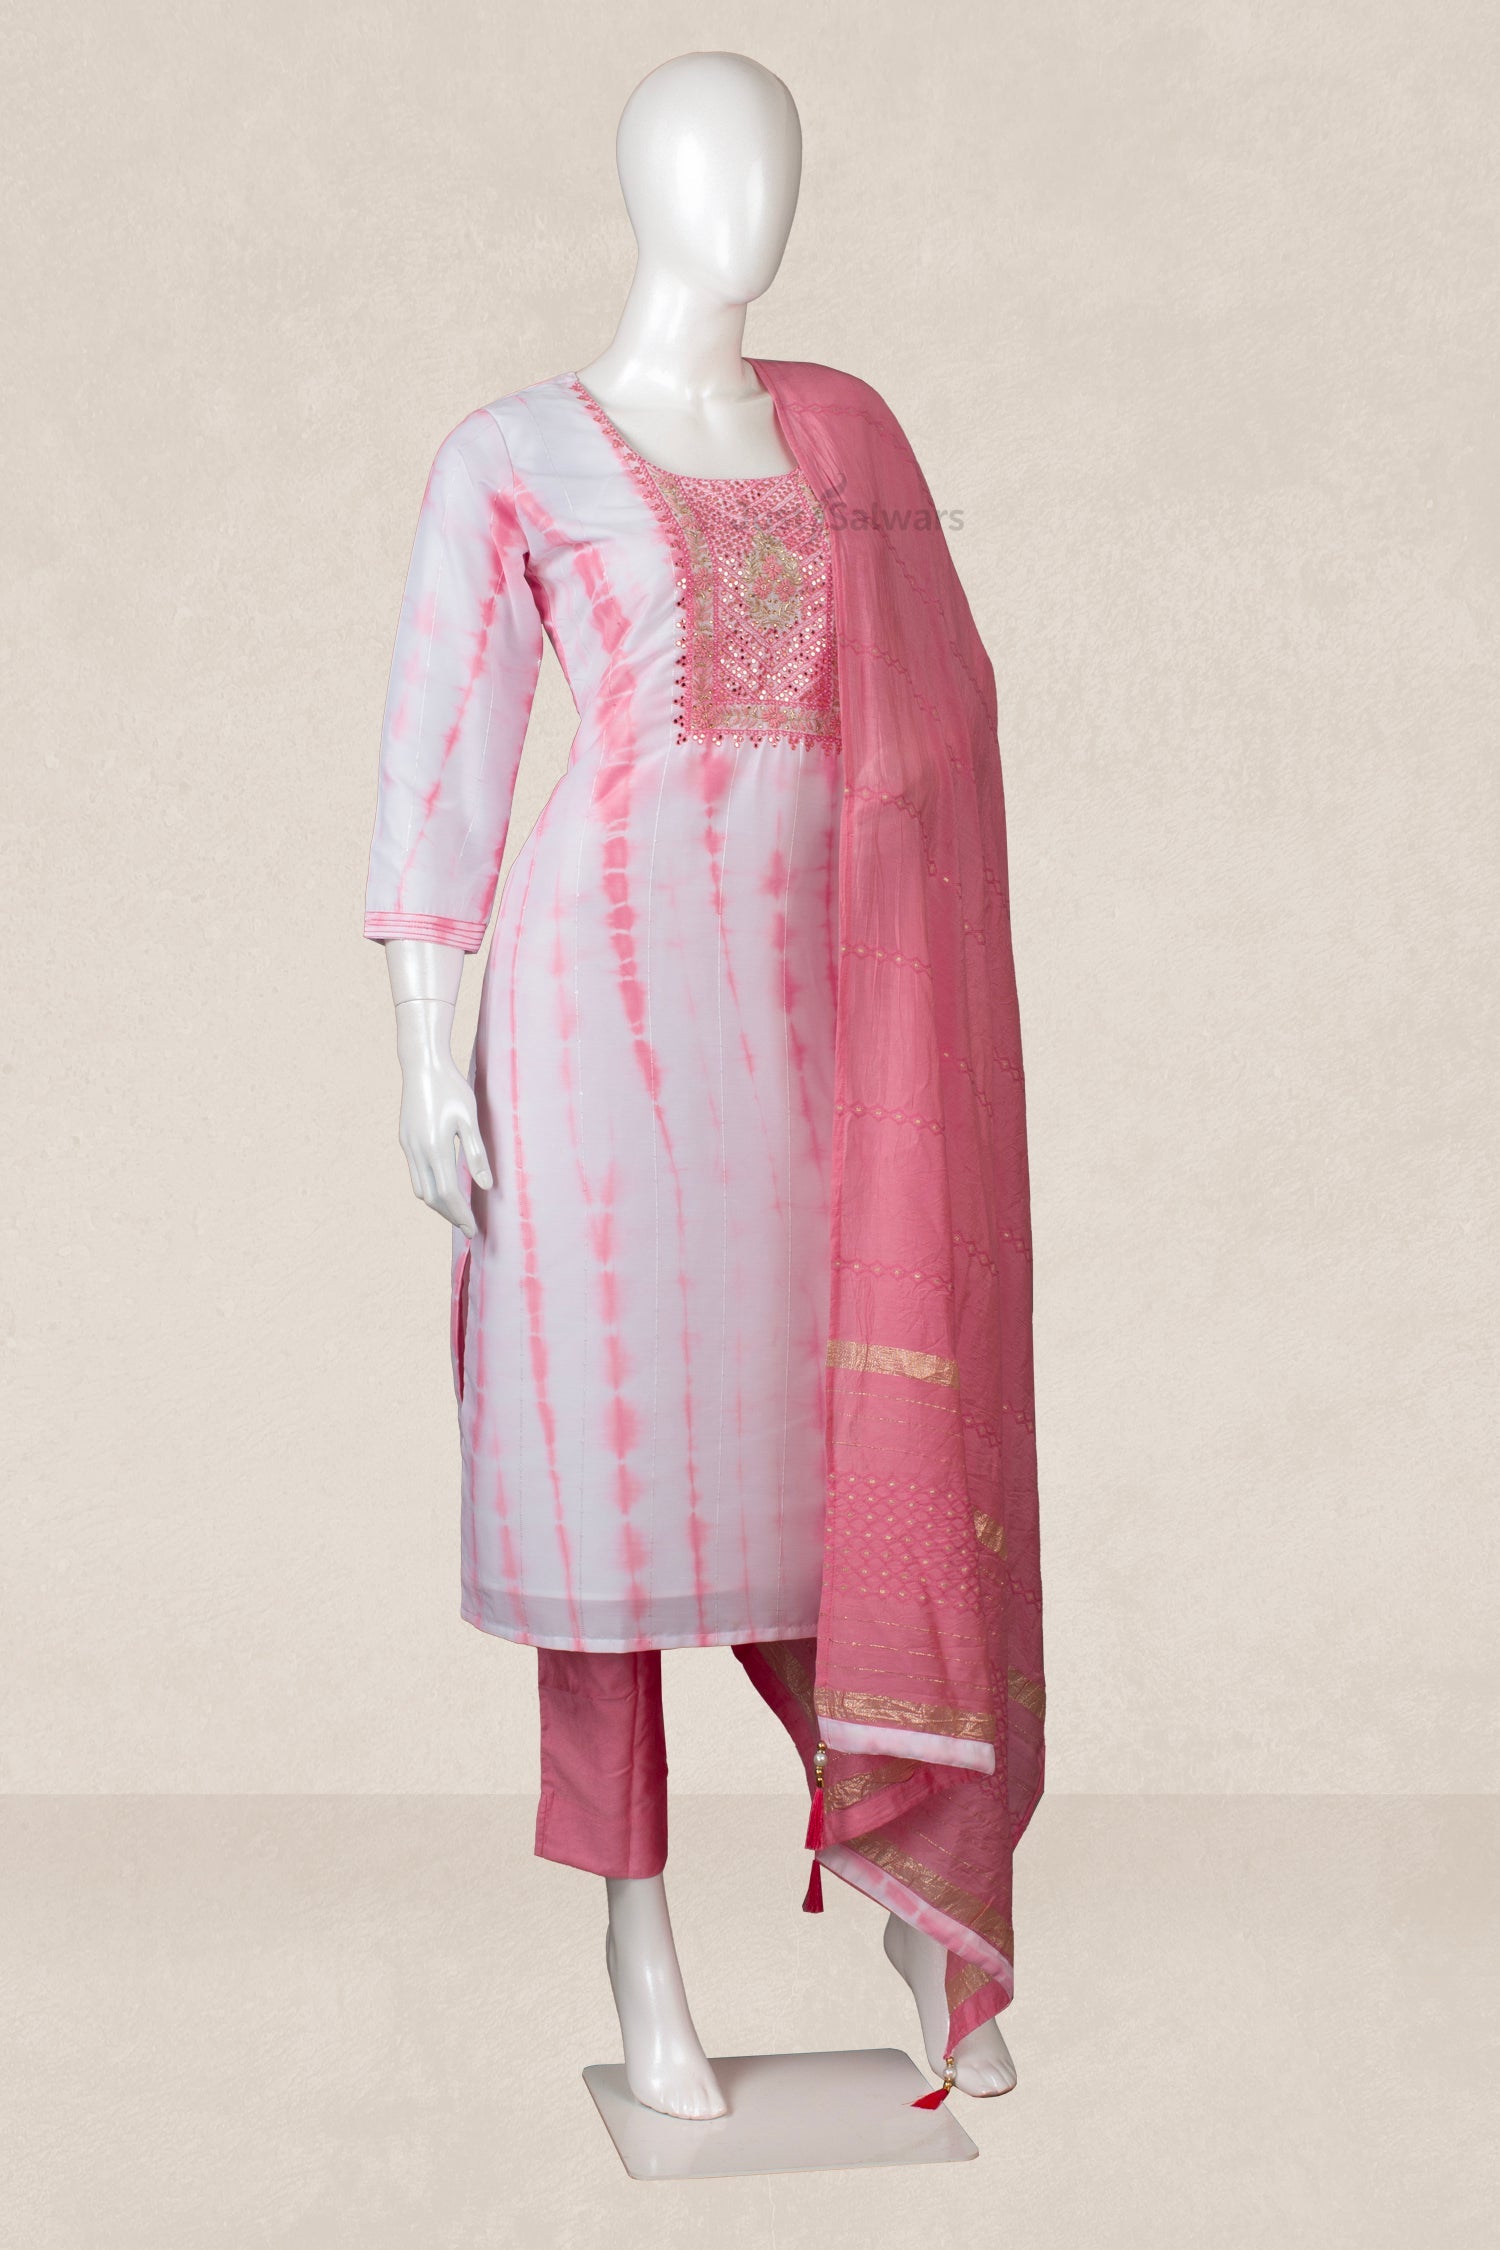 Pink and White Colour Straight Cut Salwar Suit -Salwar Suit- Just Salwars